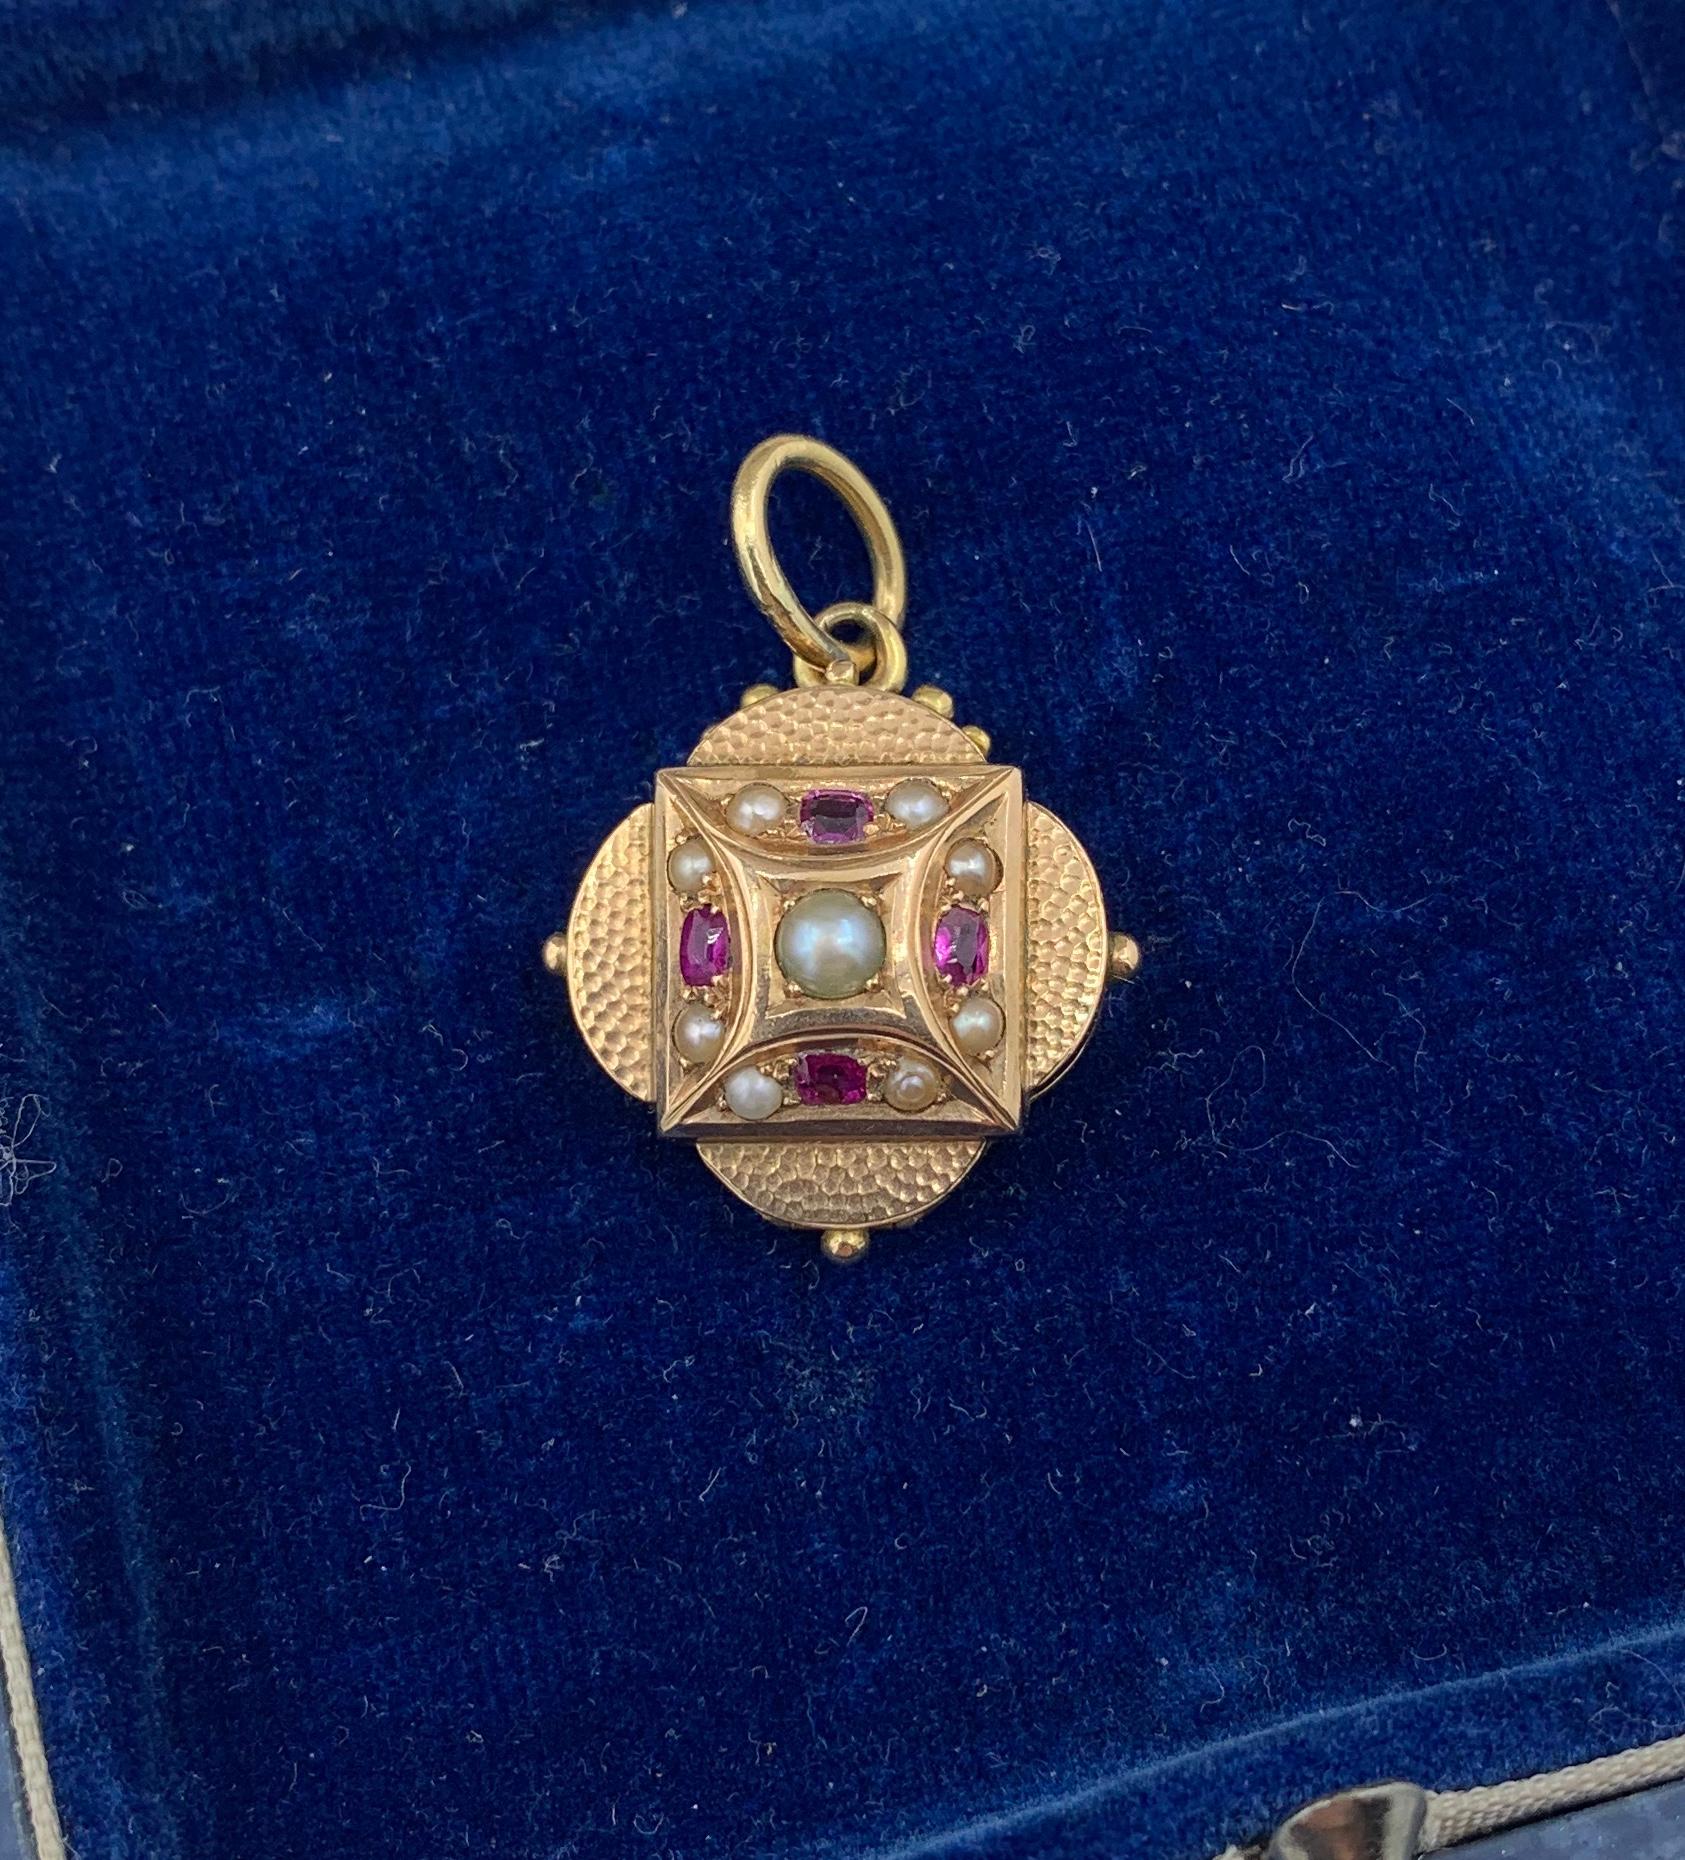 This is a rare and wonderful Victorian locket pendant with beautiful Ruby and Pearl adornments in 14 Karat Gold.  It is very rare to find antique jeweled Victorian Lockets.  This beauty is set with four beautiful oval faceted Rubies of a fine red